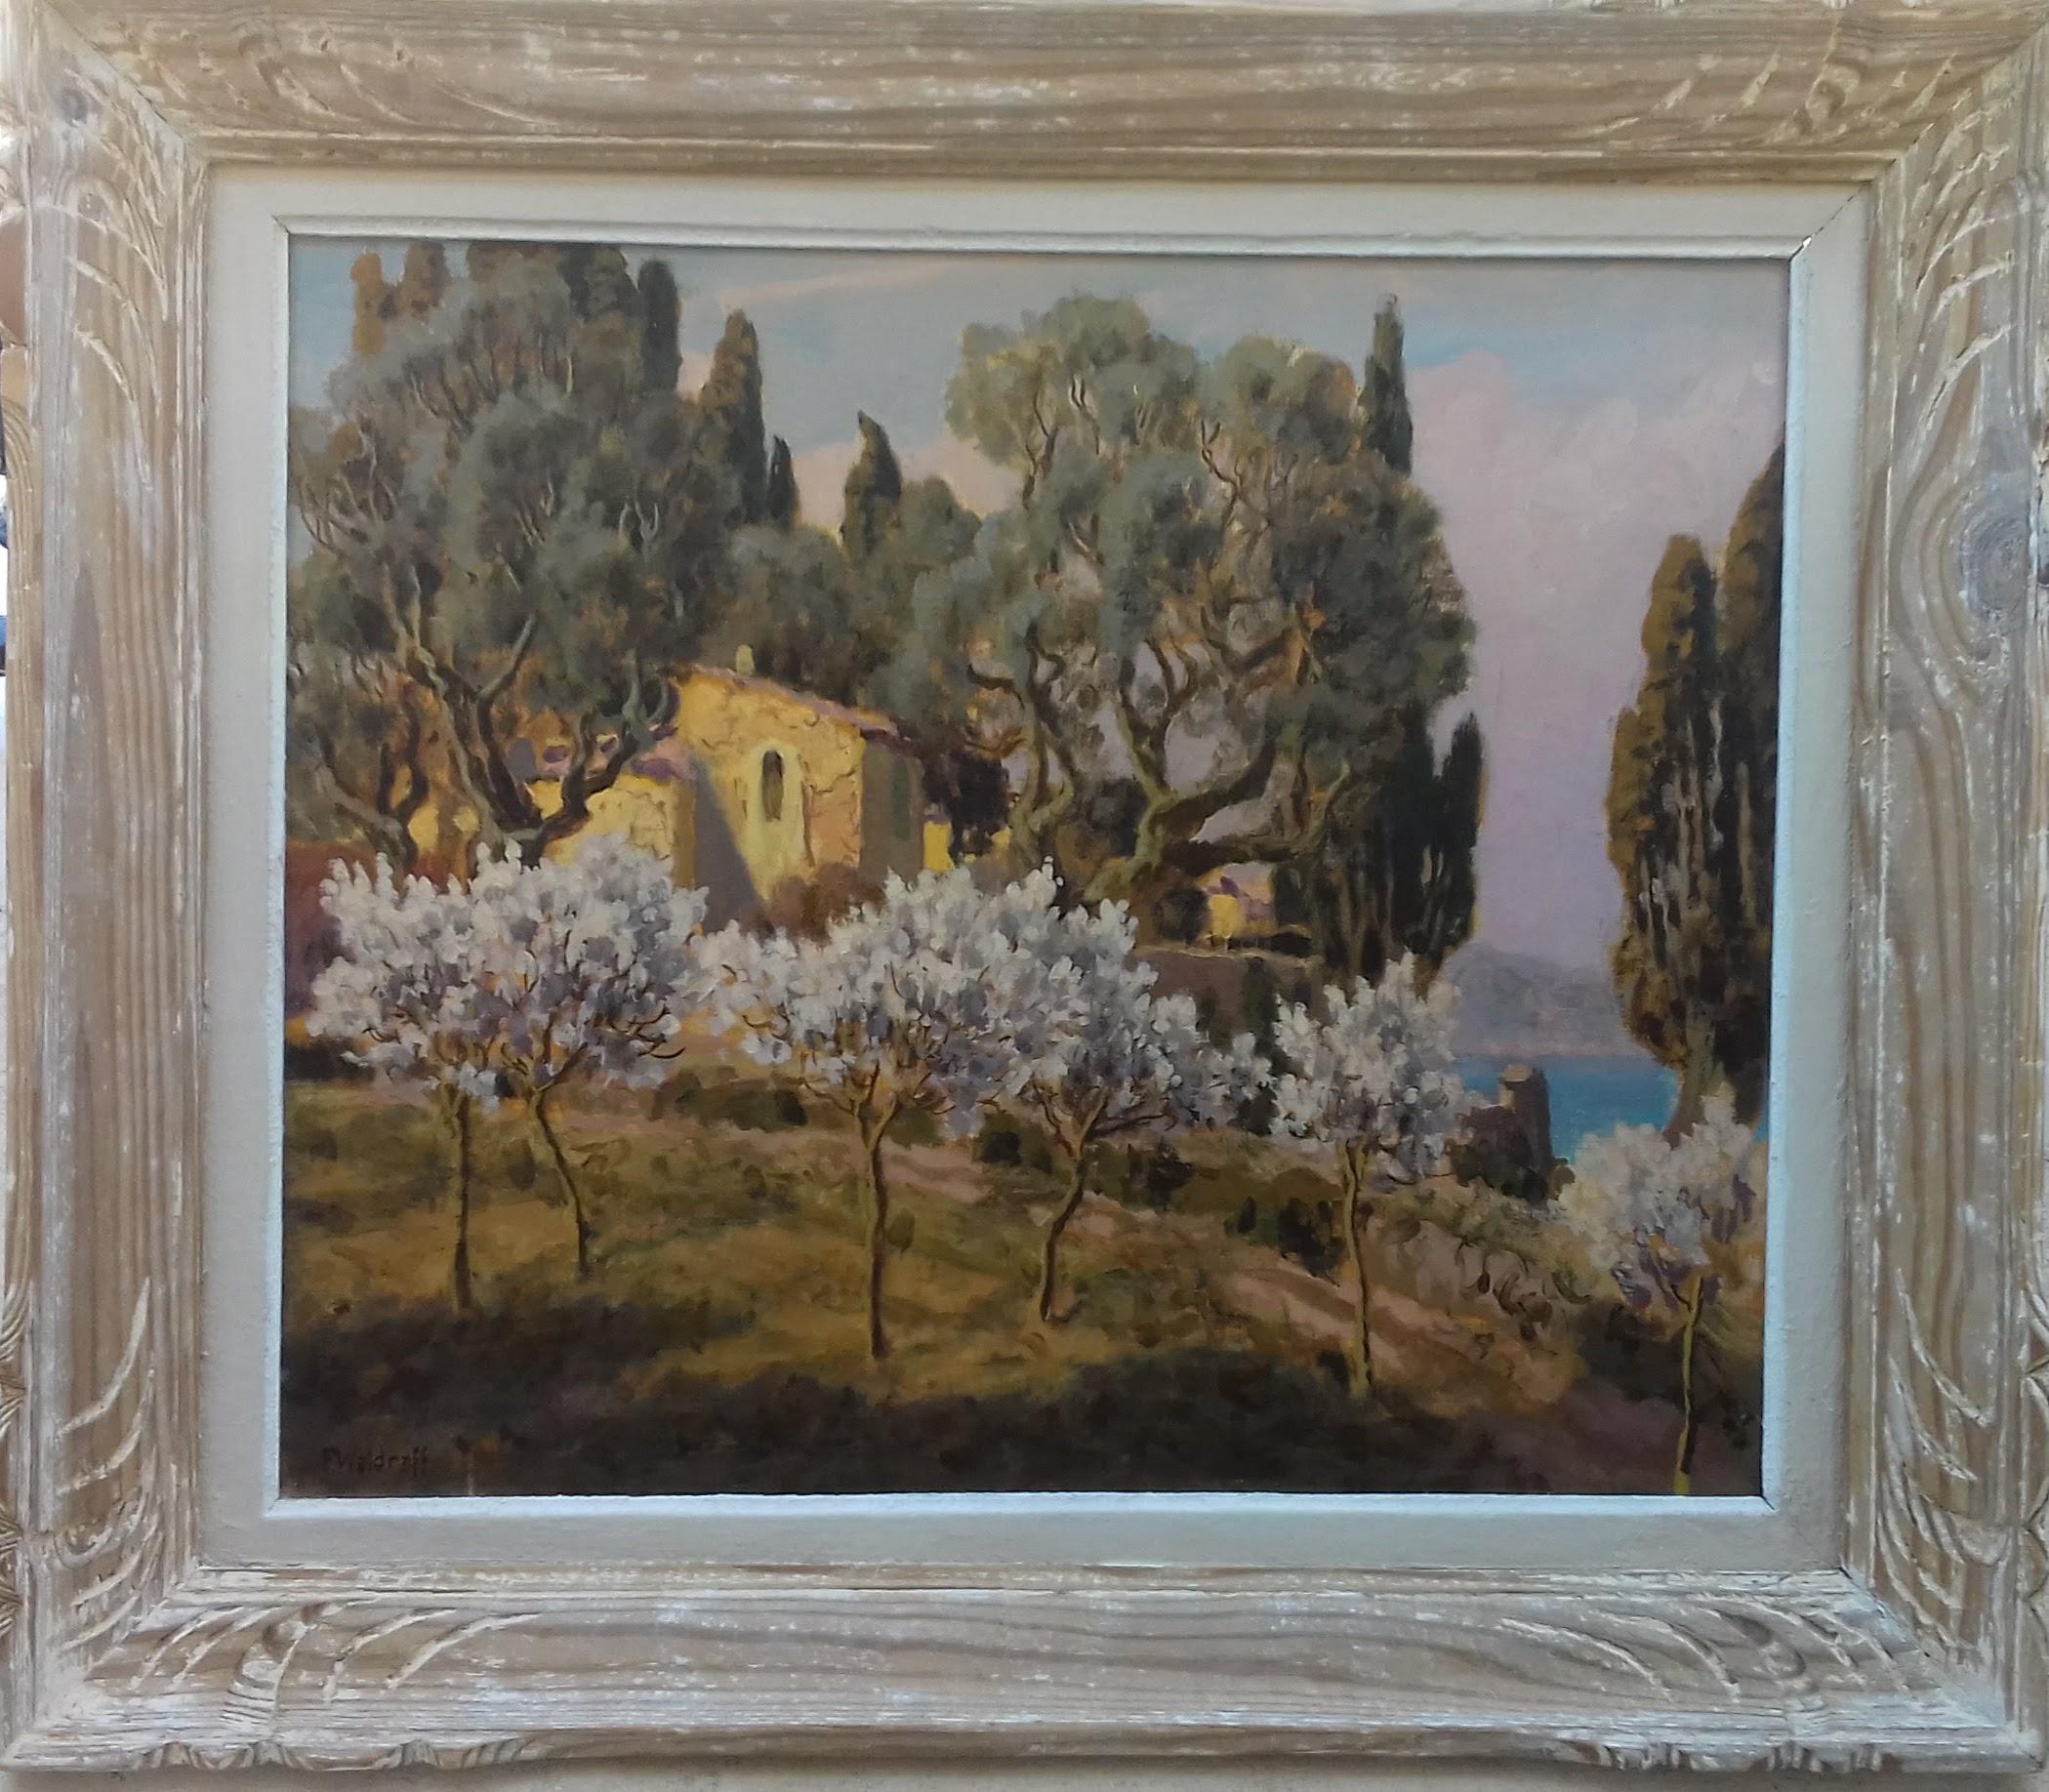 The South of France, French Riviera Near Menton, Provence Art Deco landscape - Painting by Franz Waldraff